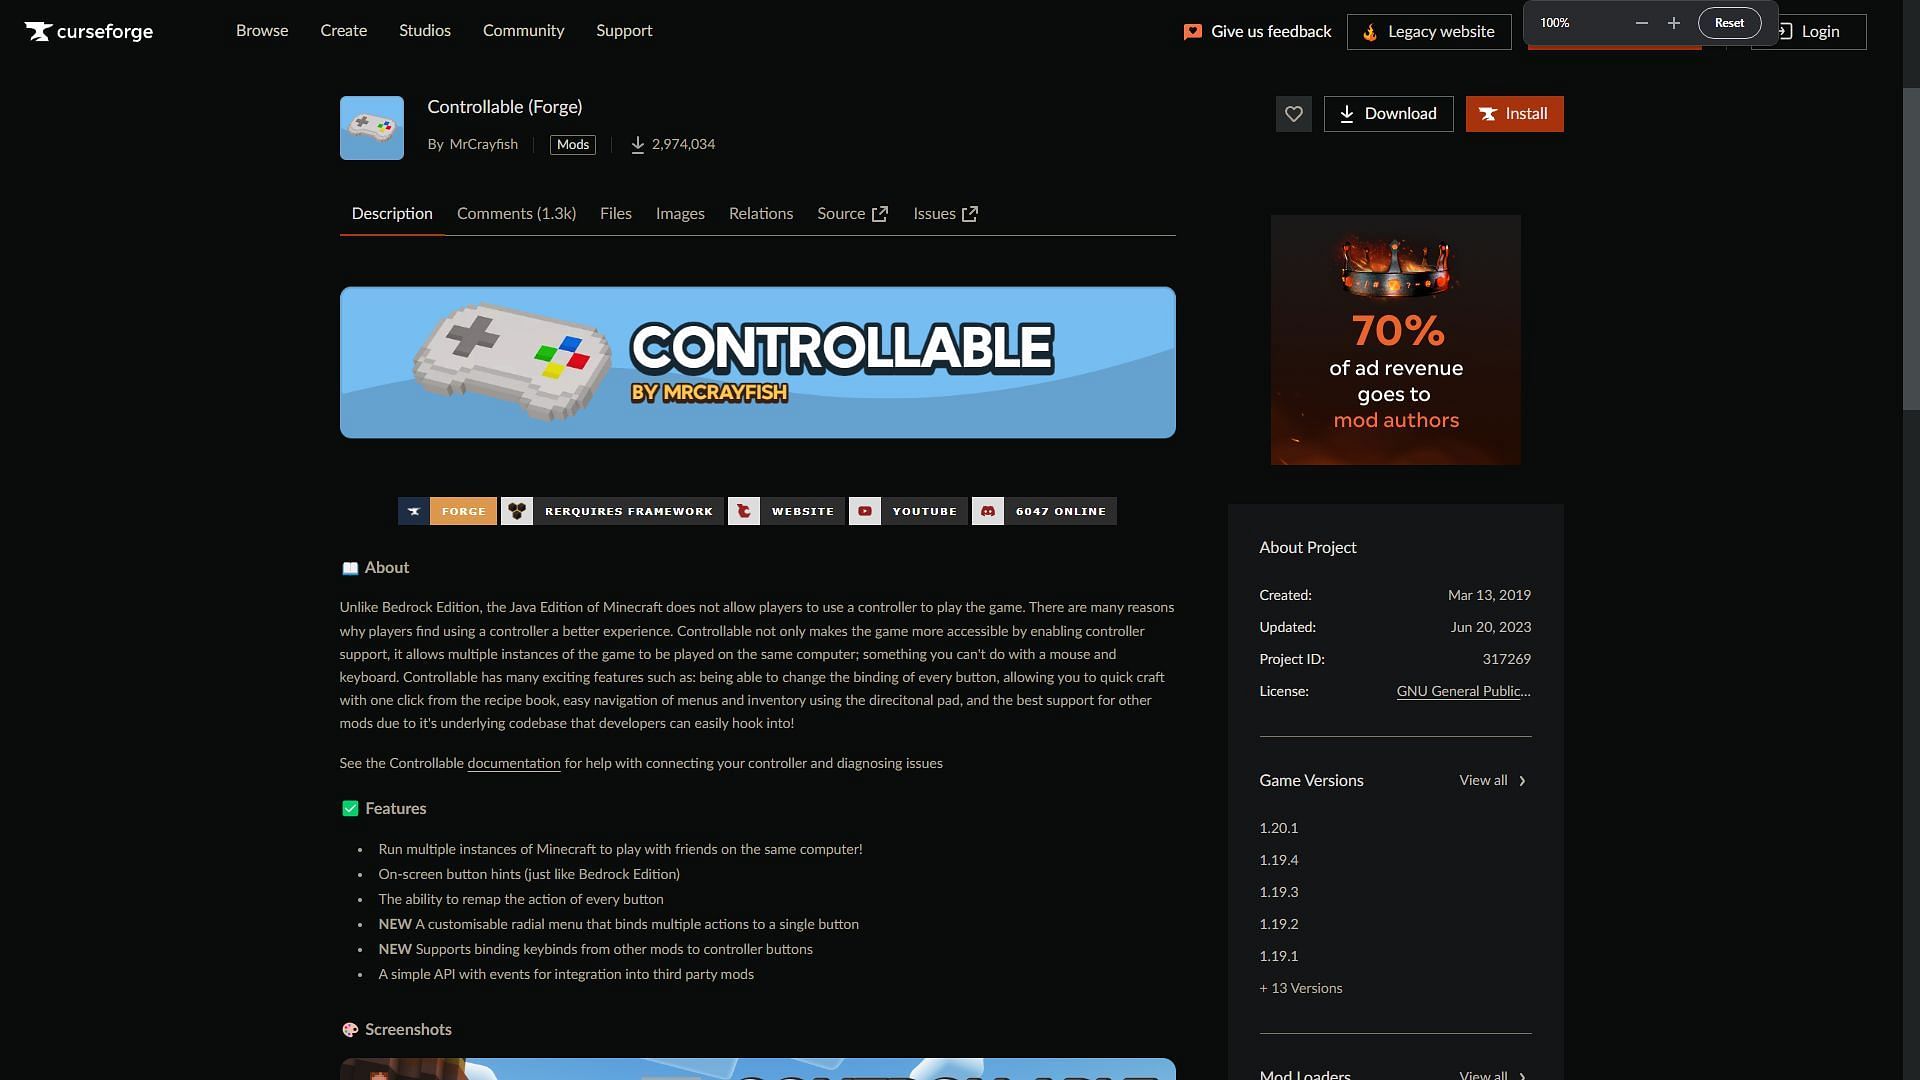 Controllable mod for Minecraft Java Edition can be downloaded from CurseForge website (Image via CurseForge)